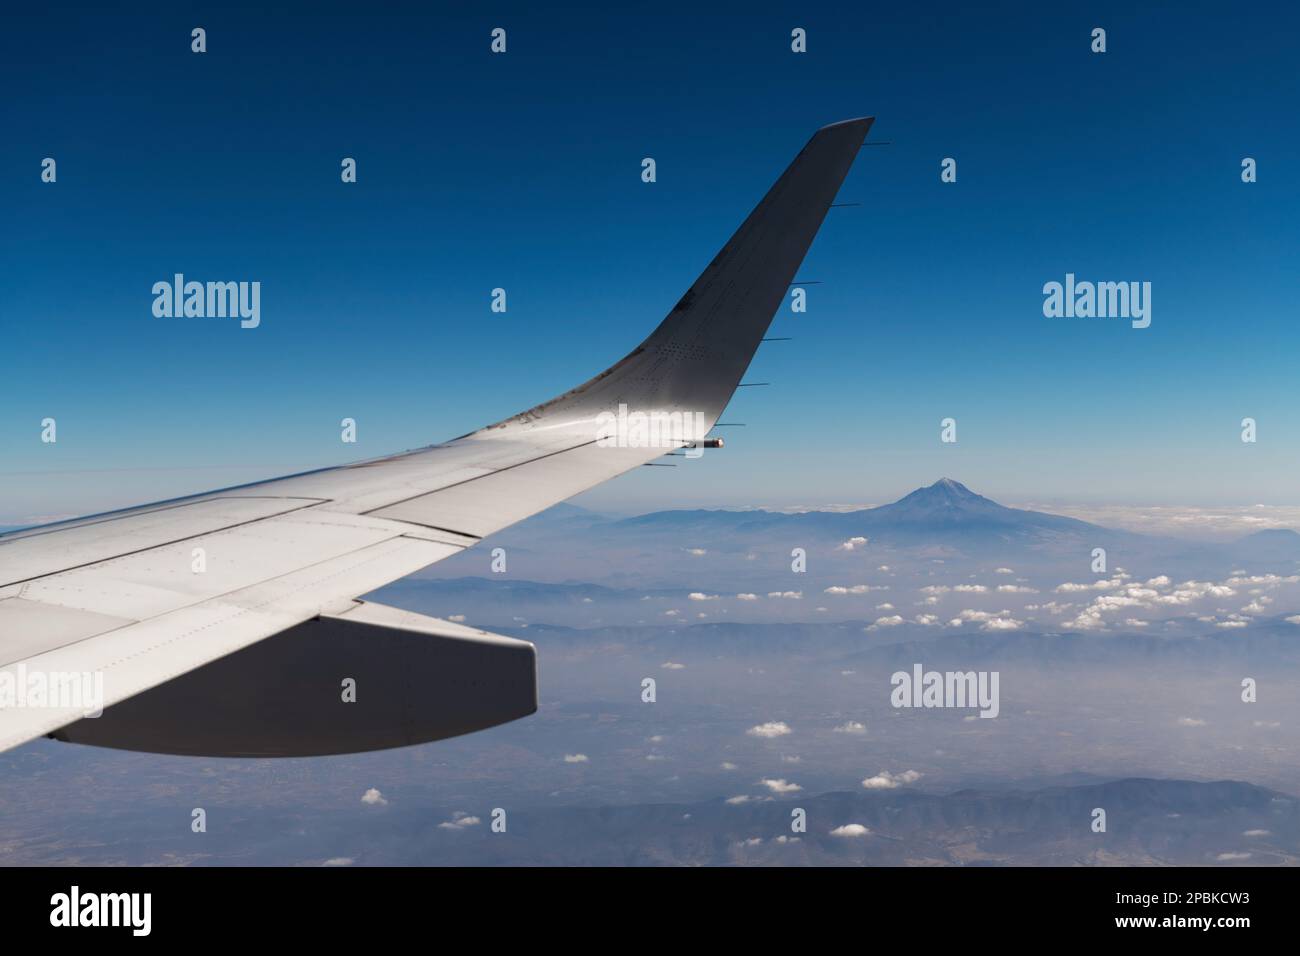 Pico de Orizaba or Citlaltepetl volcano, highest mountain peak of Mexico, seen from airplane with wing. Stock Photo